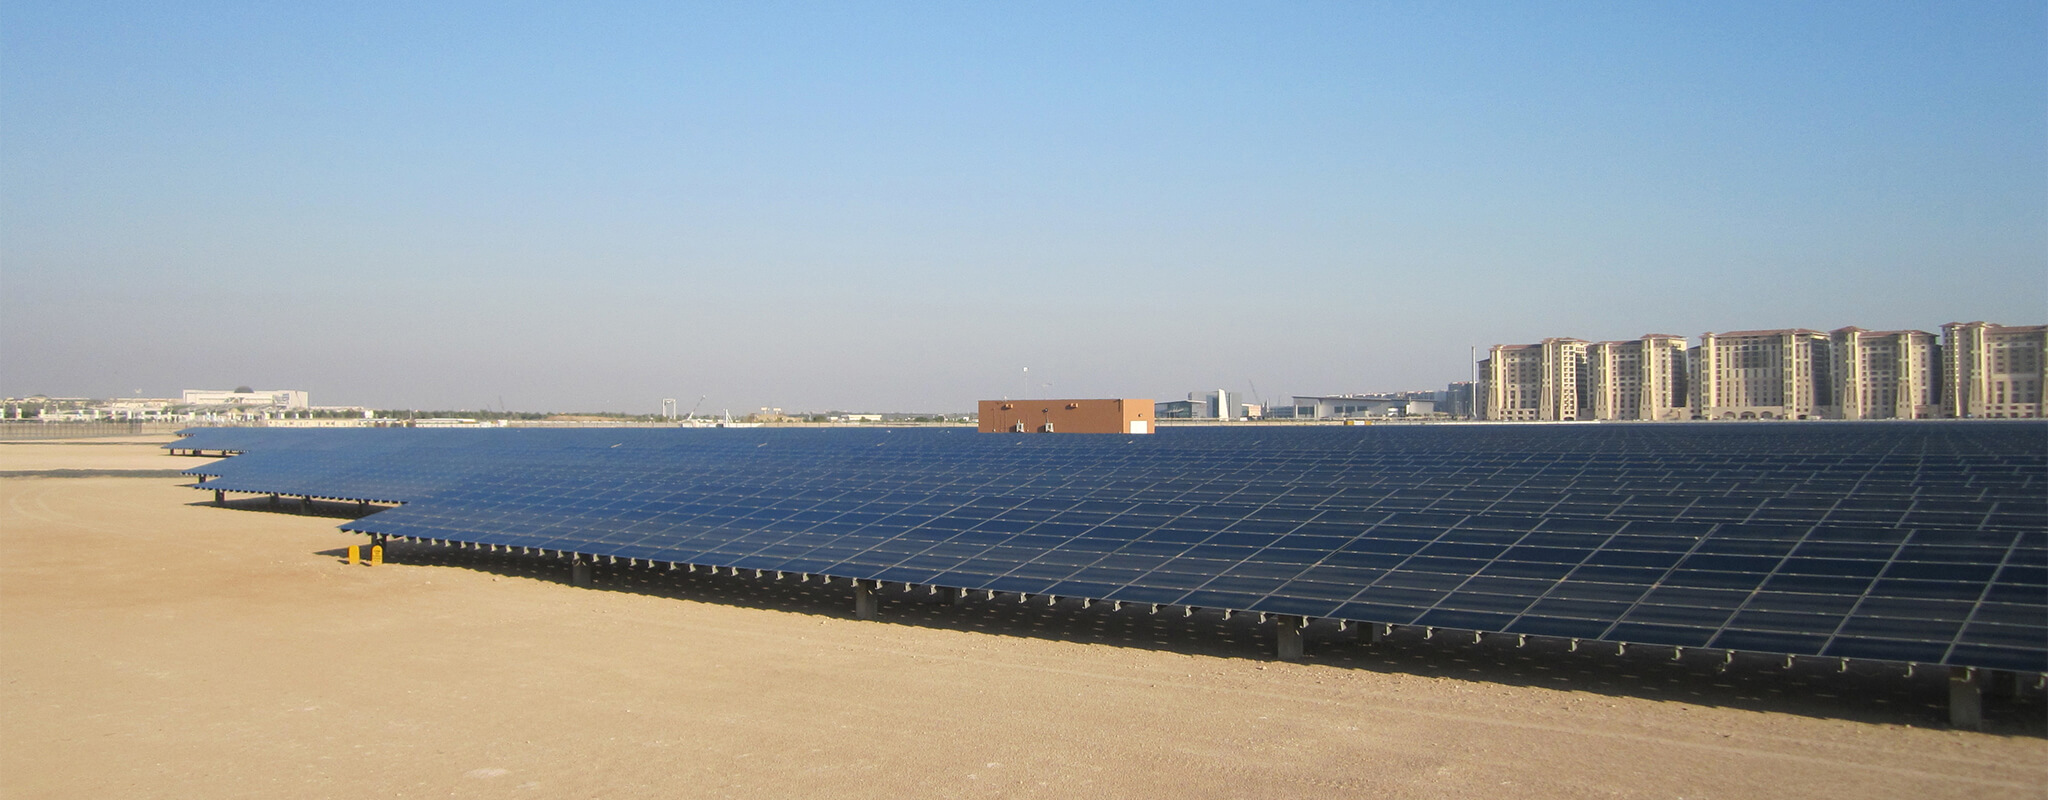 Quality assurance for PV modules and power plants